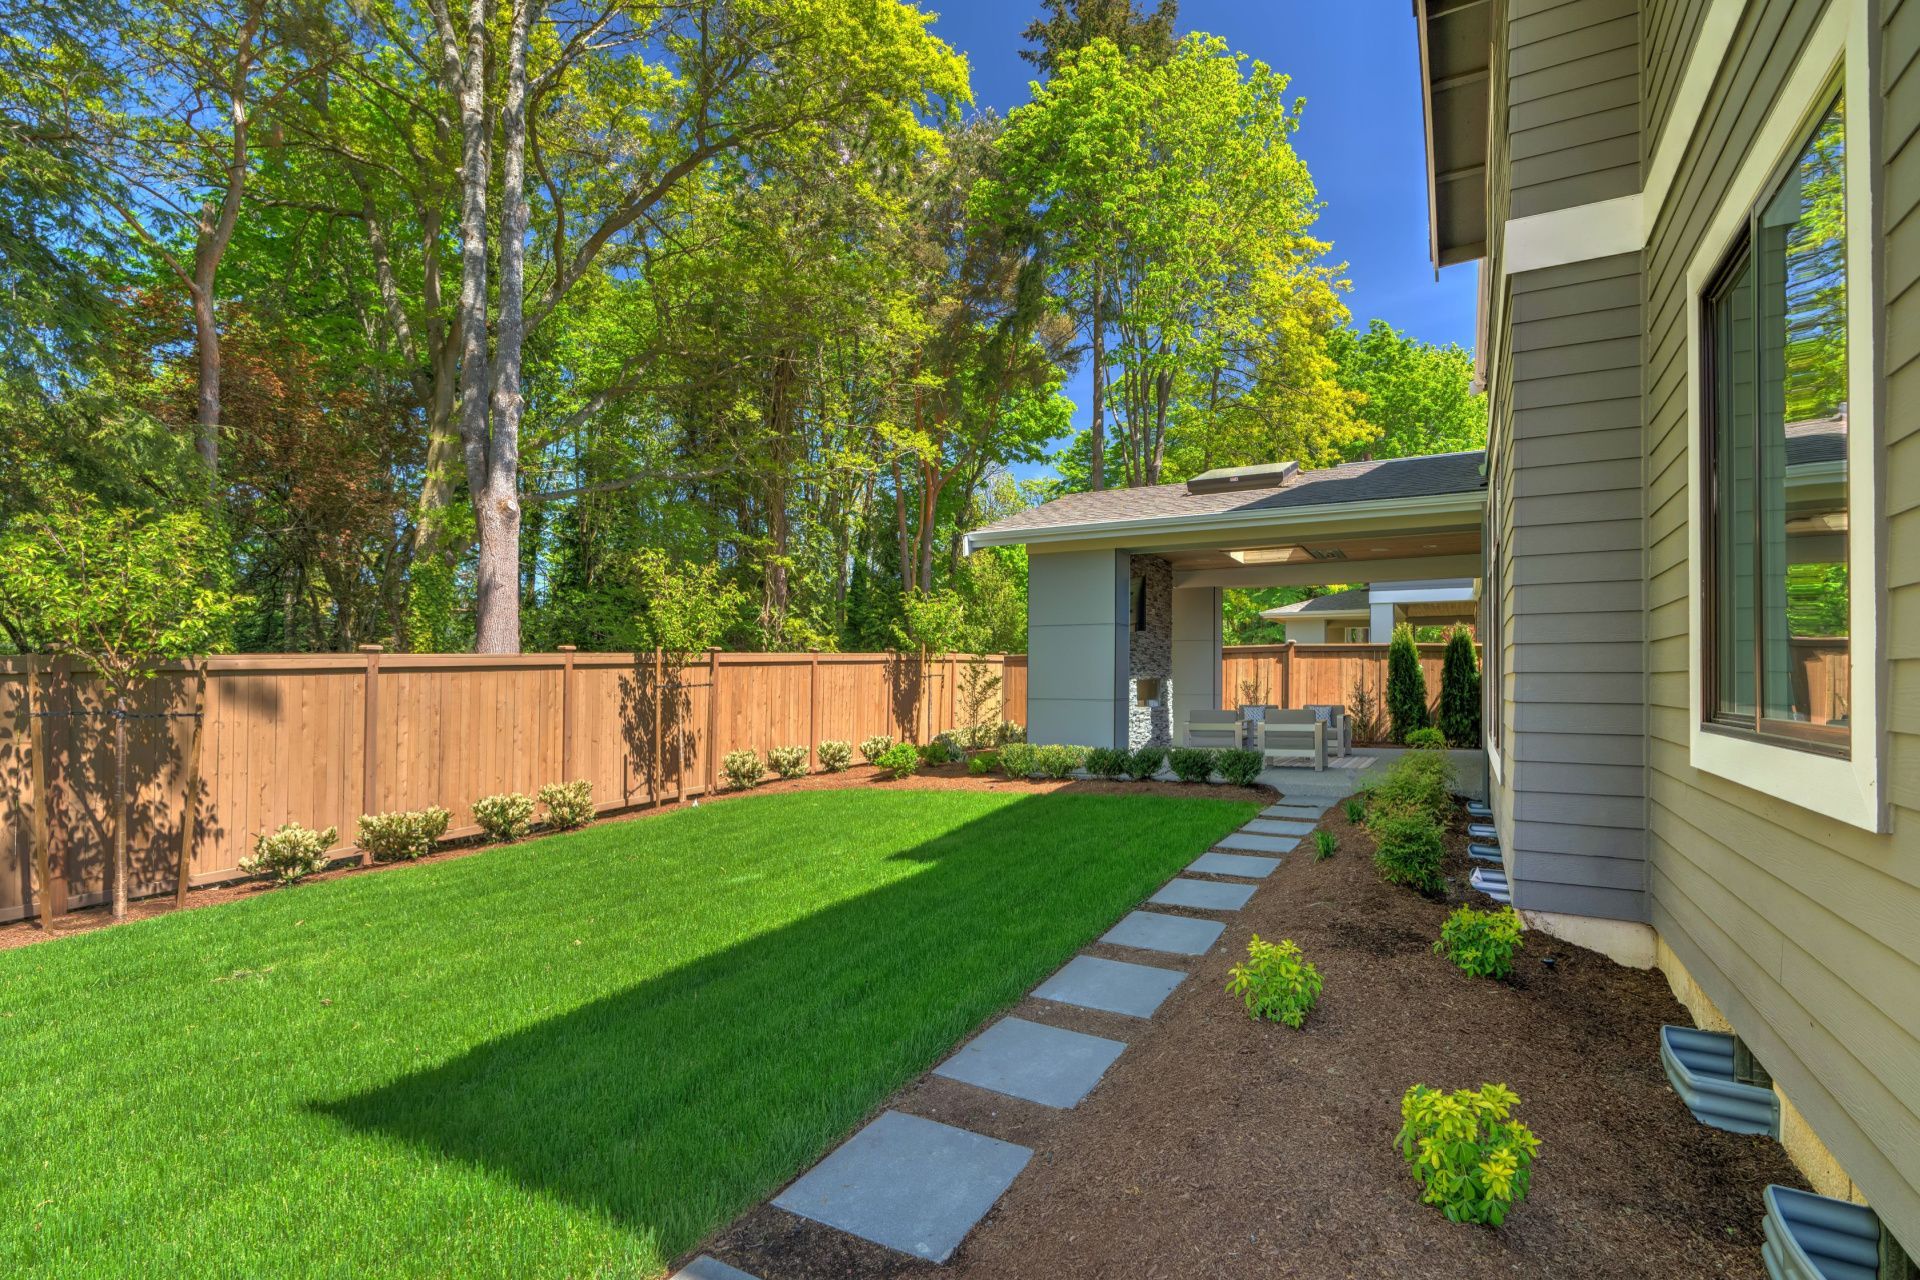 a house with a lush green lawn and a wooden fence